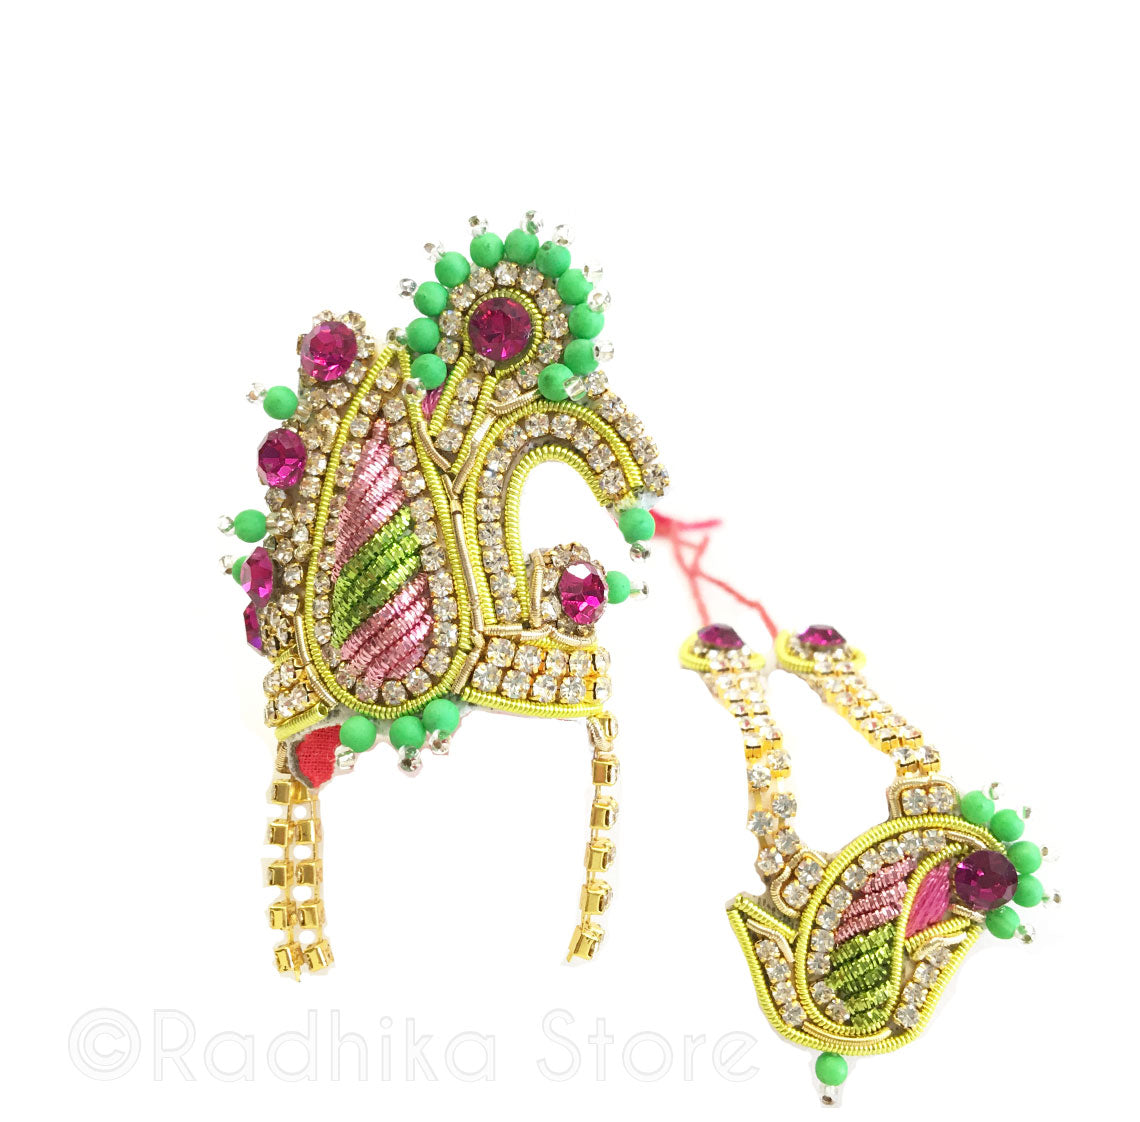 Vrinda Kund - Swan Crown and Necklace Set- Pink and Green Colors